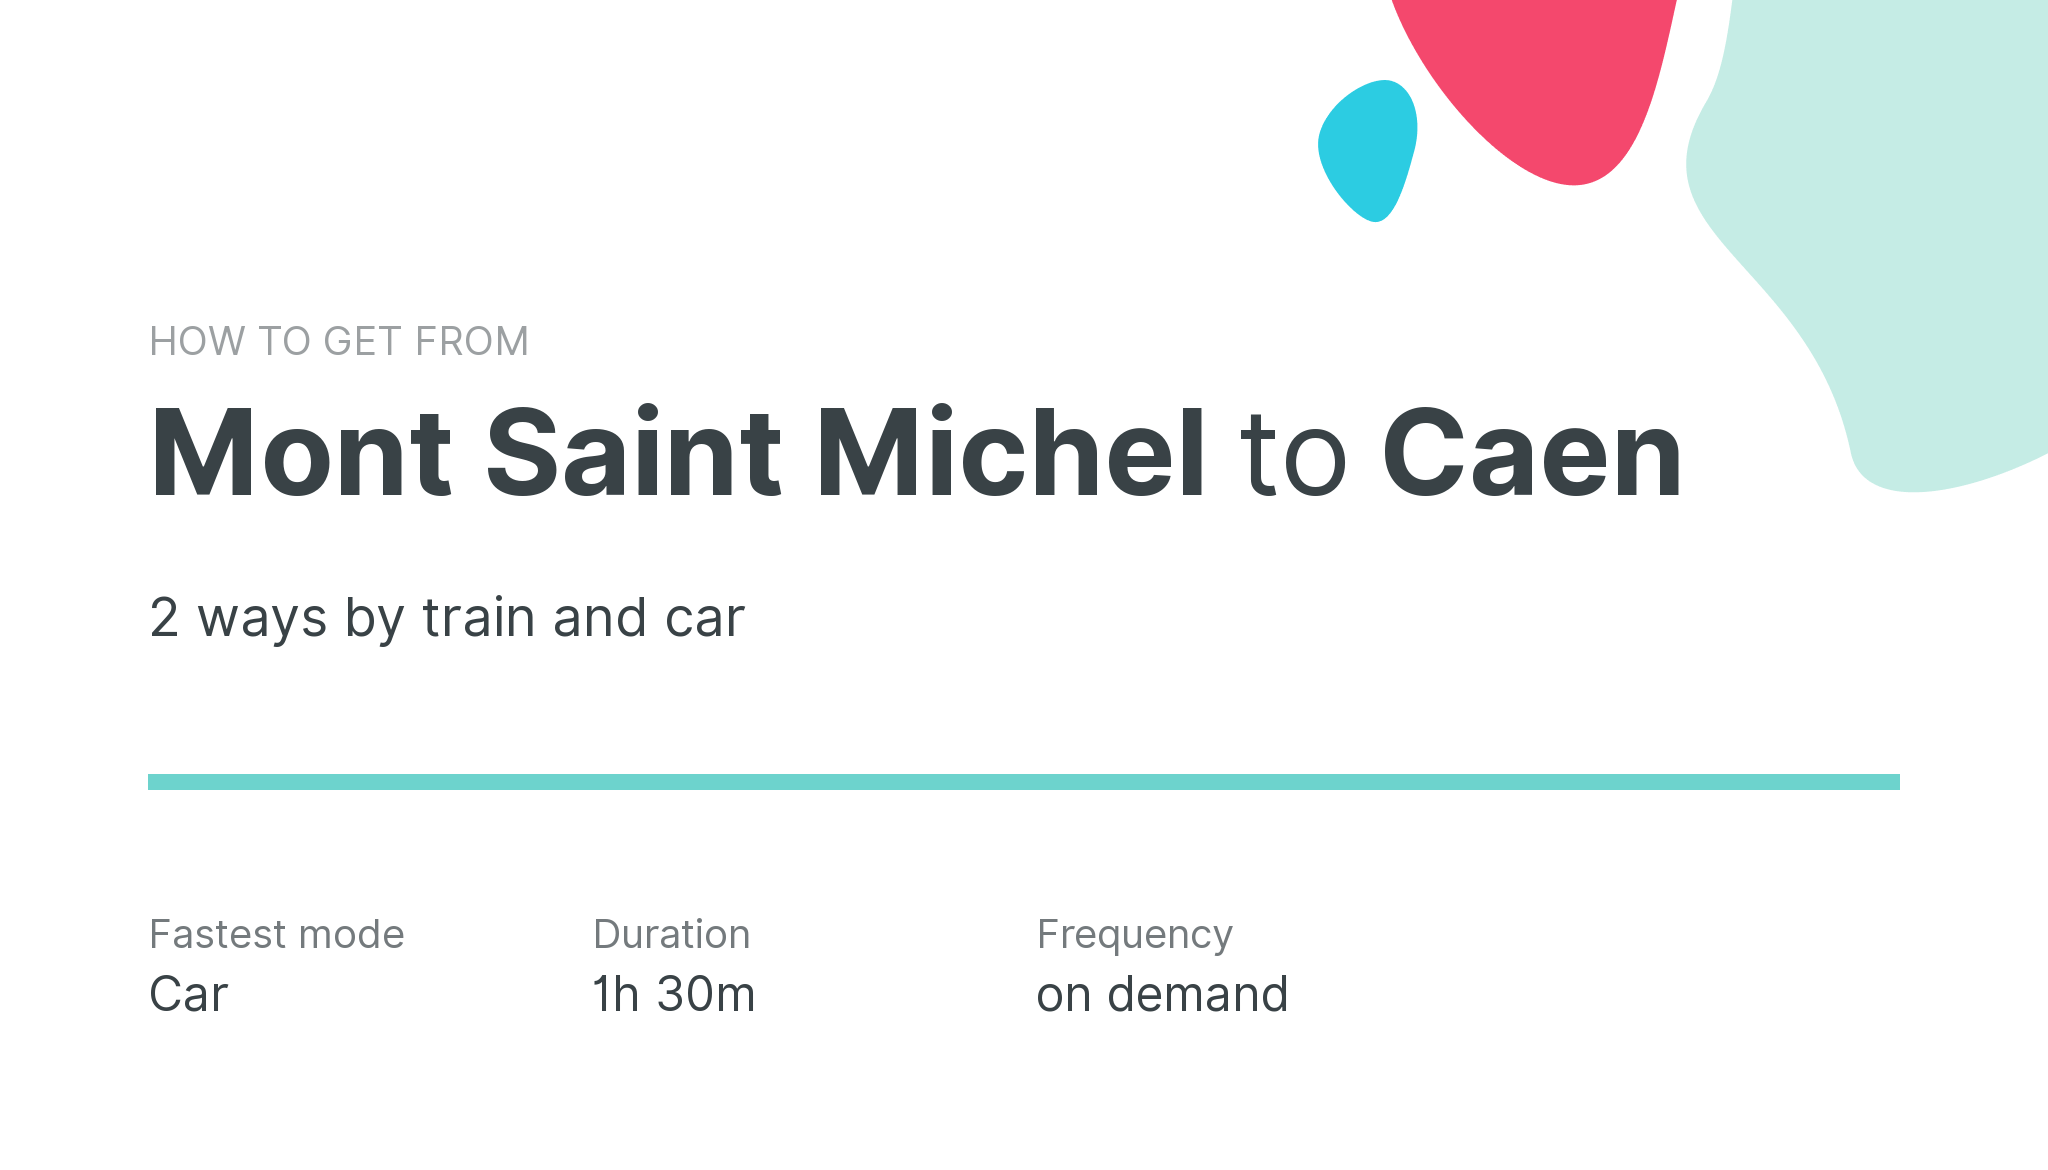 How do I get from Mont Saint Michel to Caen